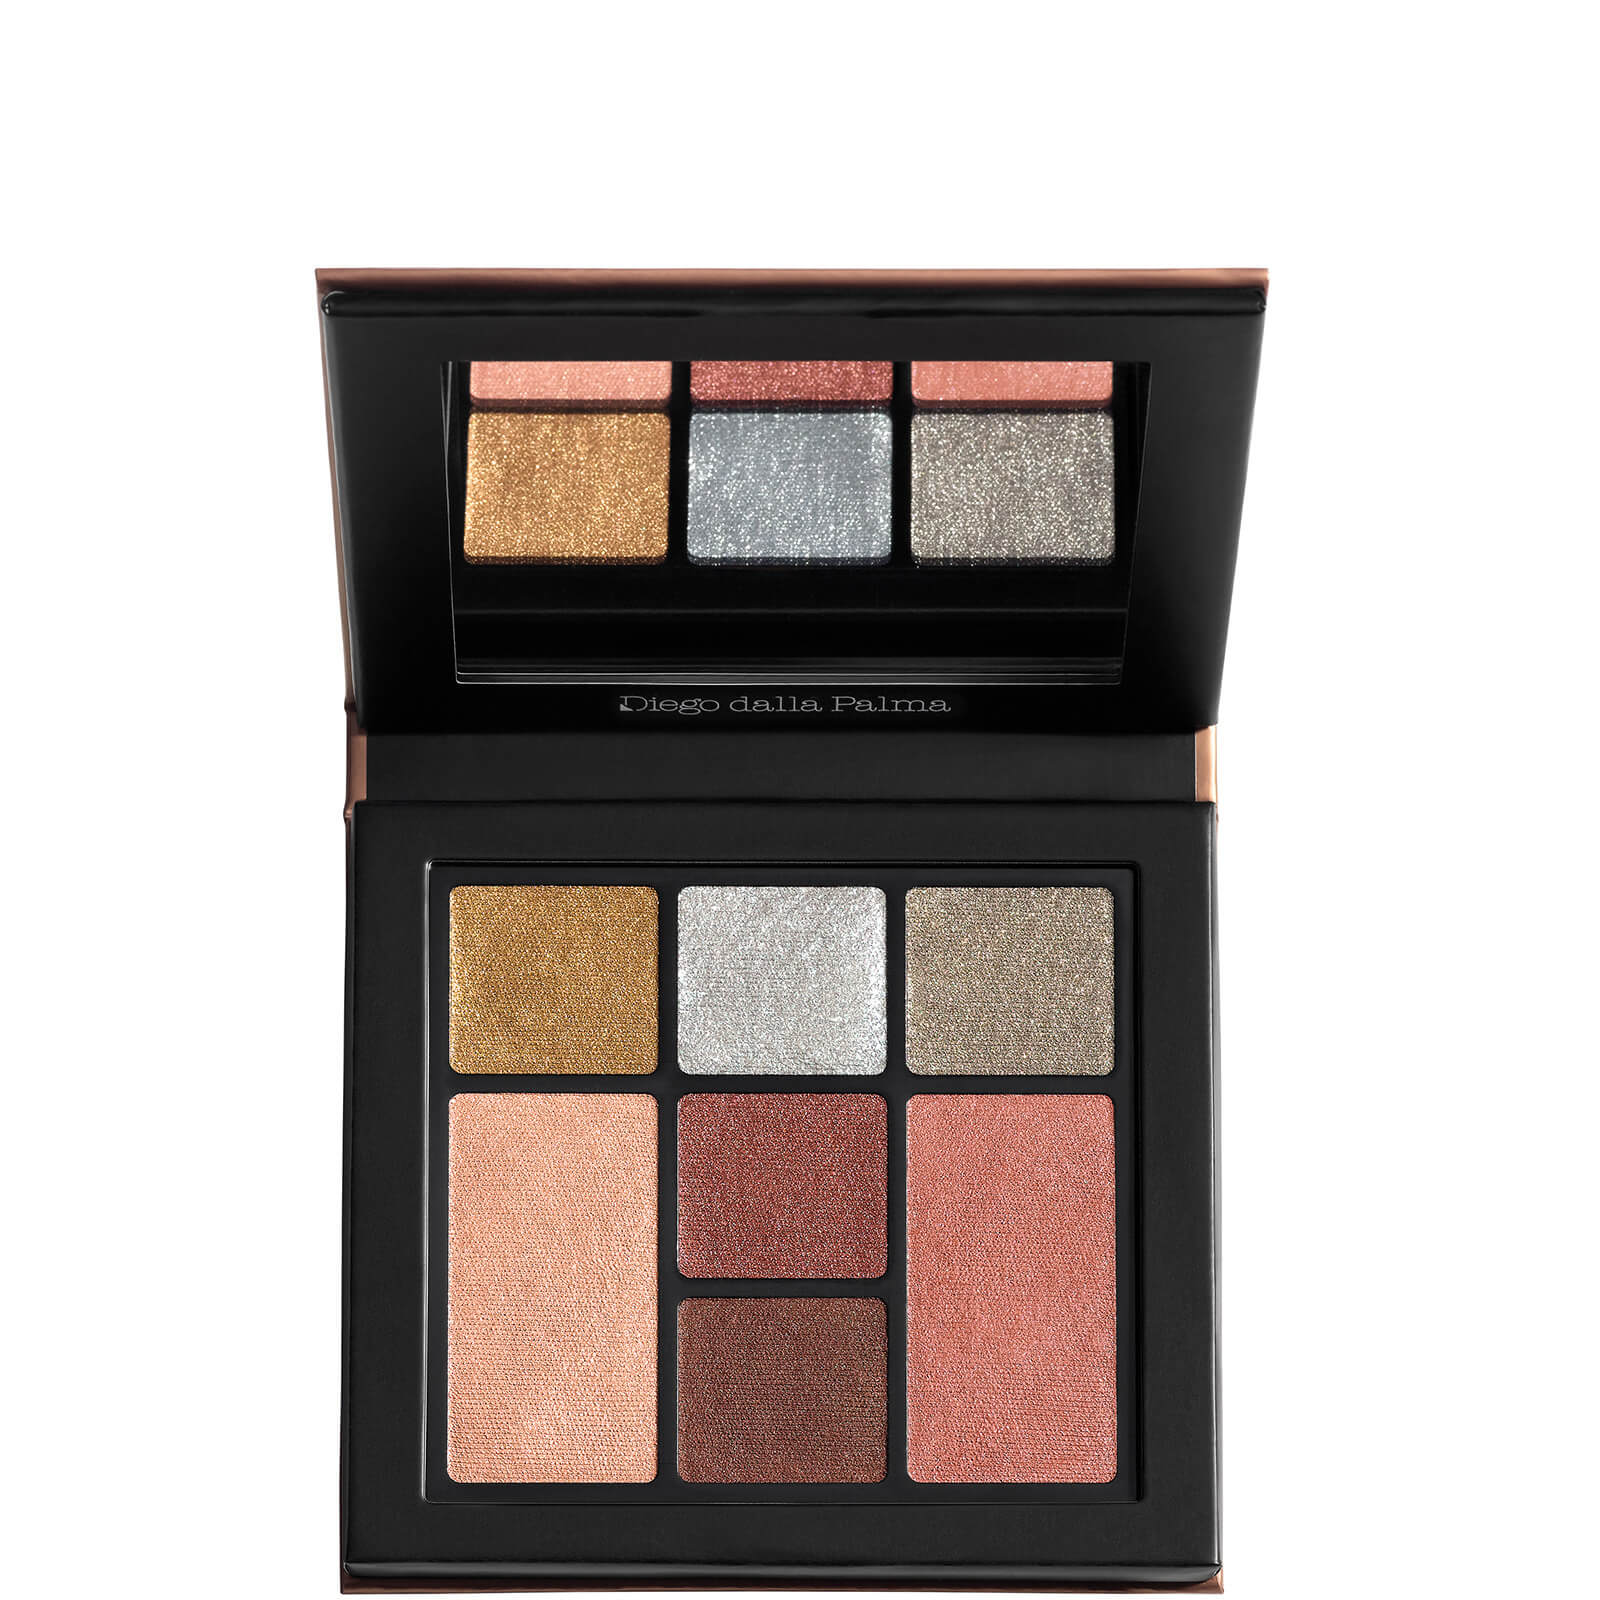 DIEGO DALLA PALMA MILANO TRIBAL QUEEN FACE AND EYES PALETTE,DFC12197